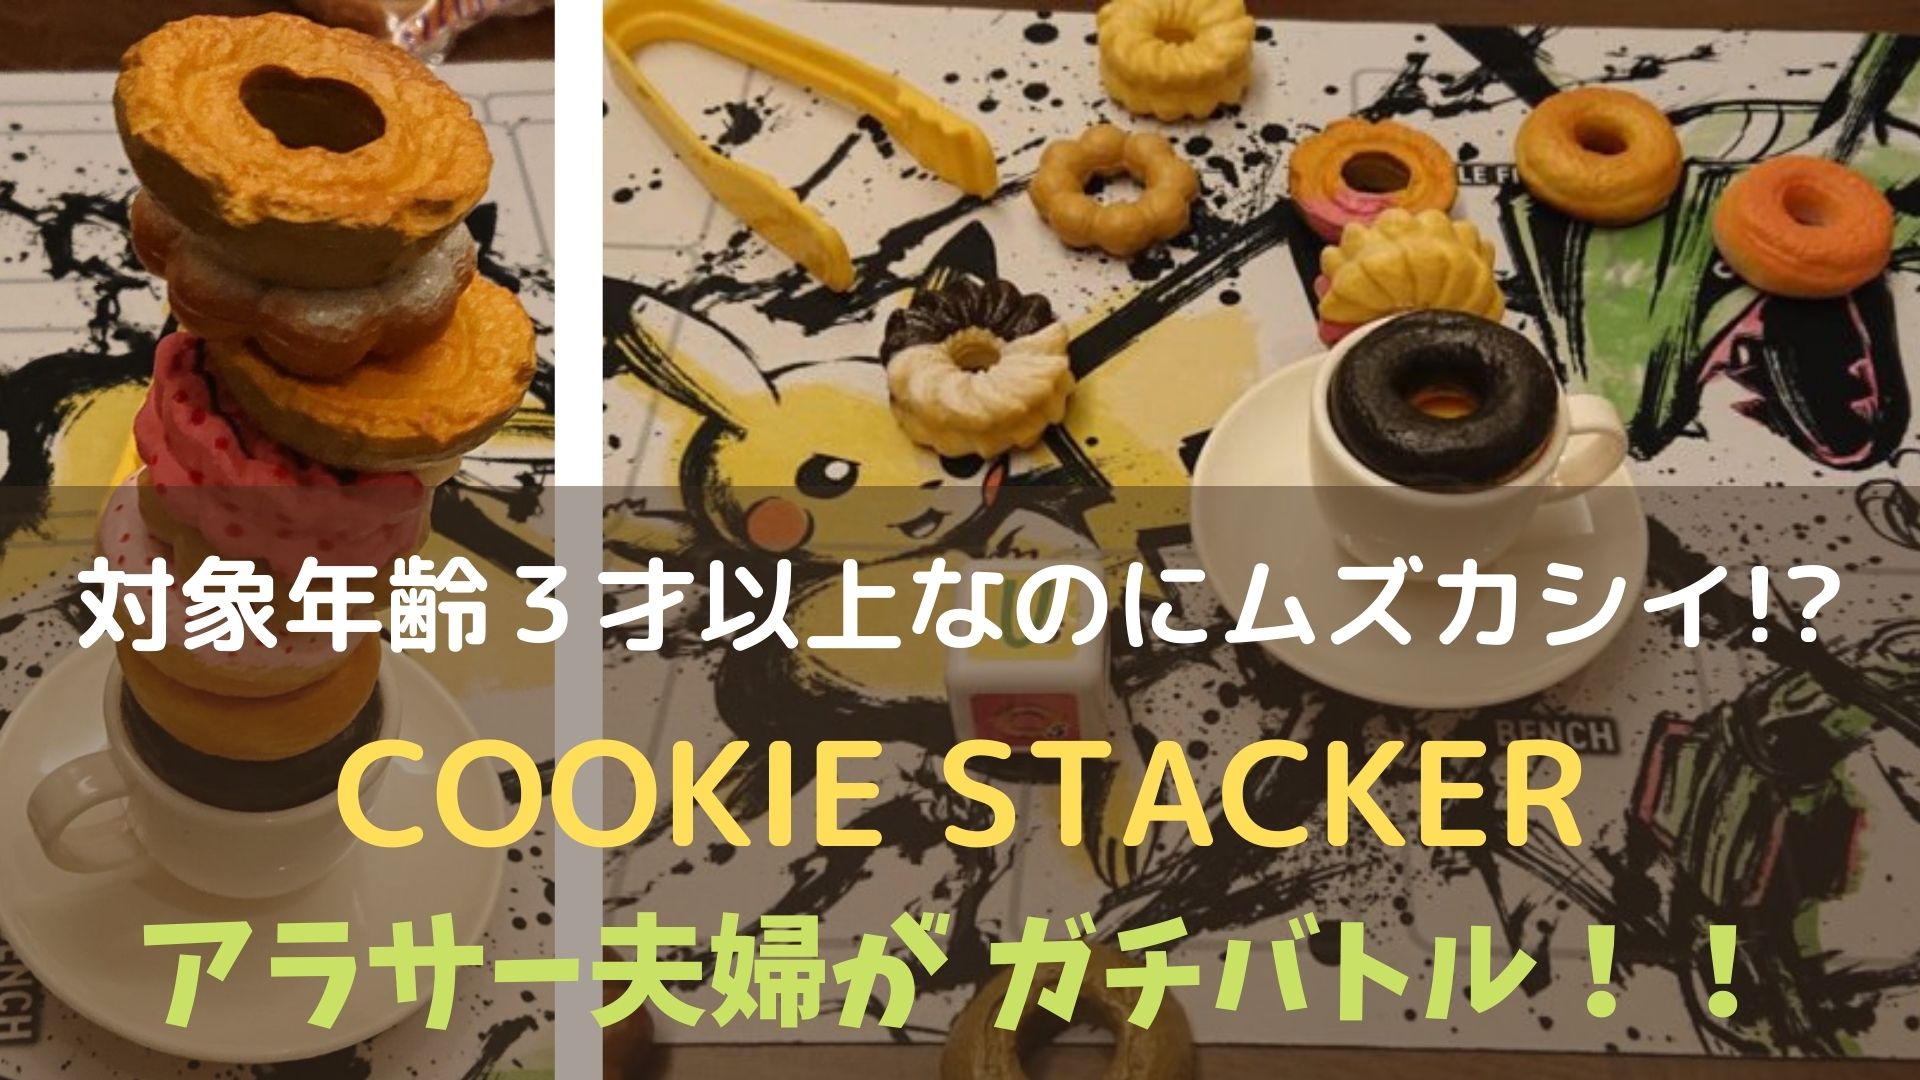 COOKIE STACKERアイキャッチ